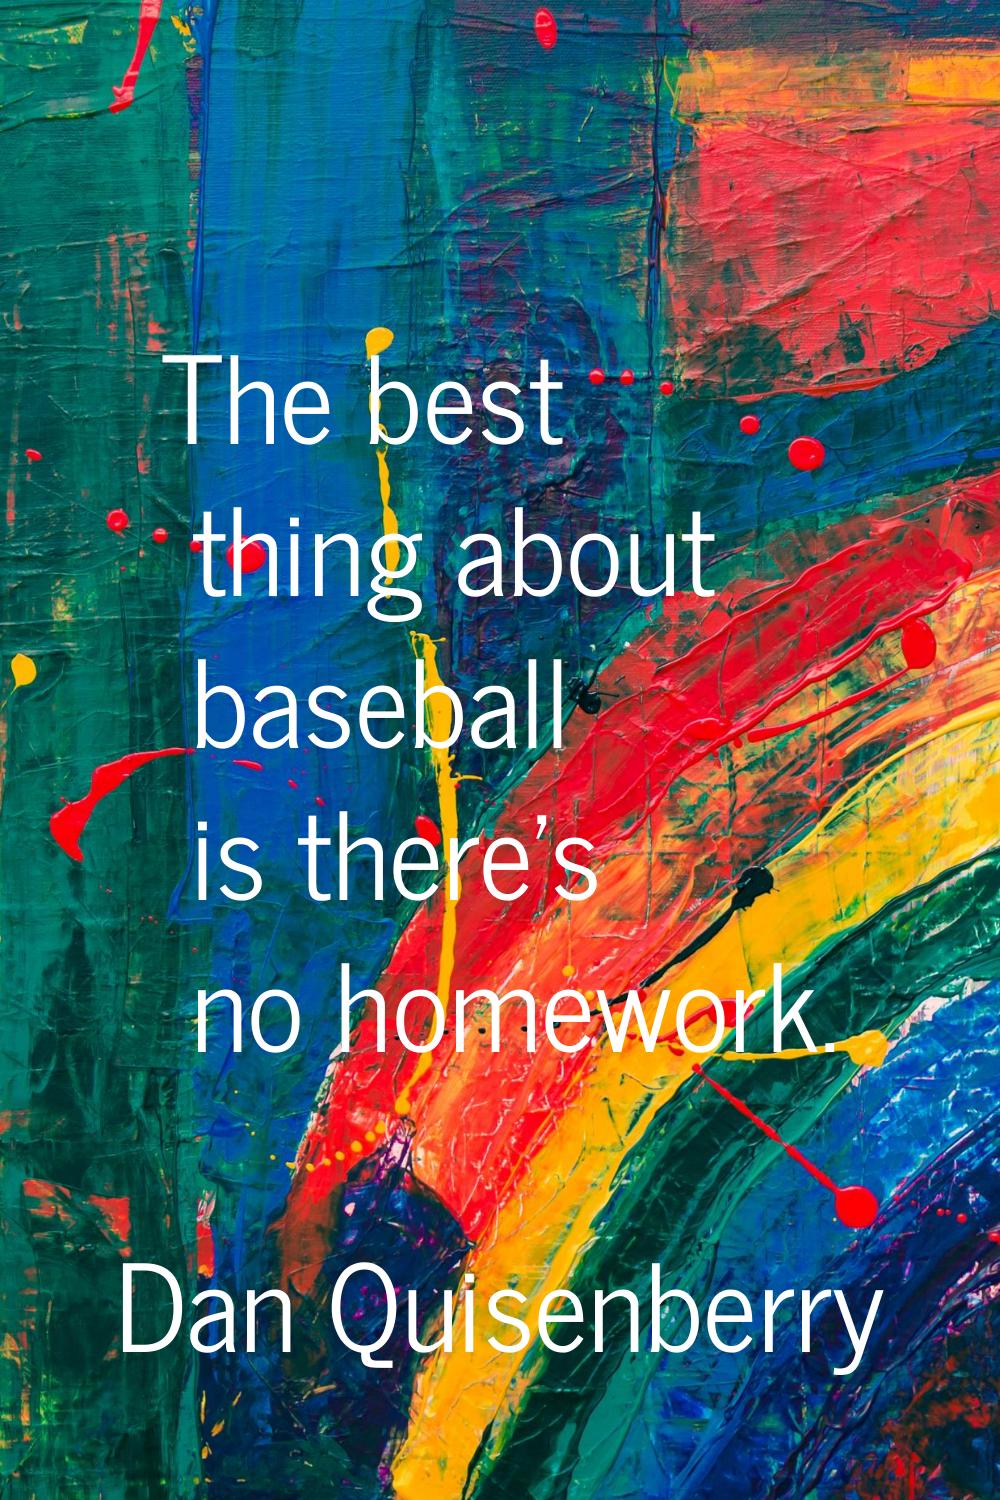 The best thing about baseball is there's no homework.